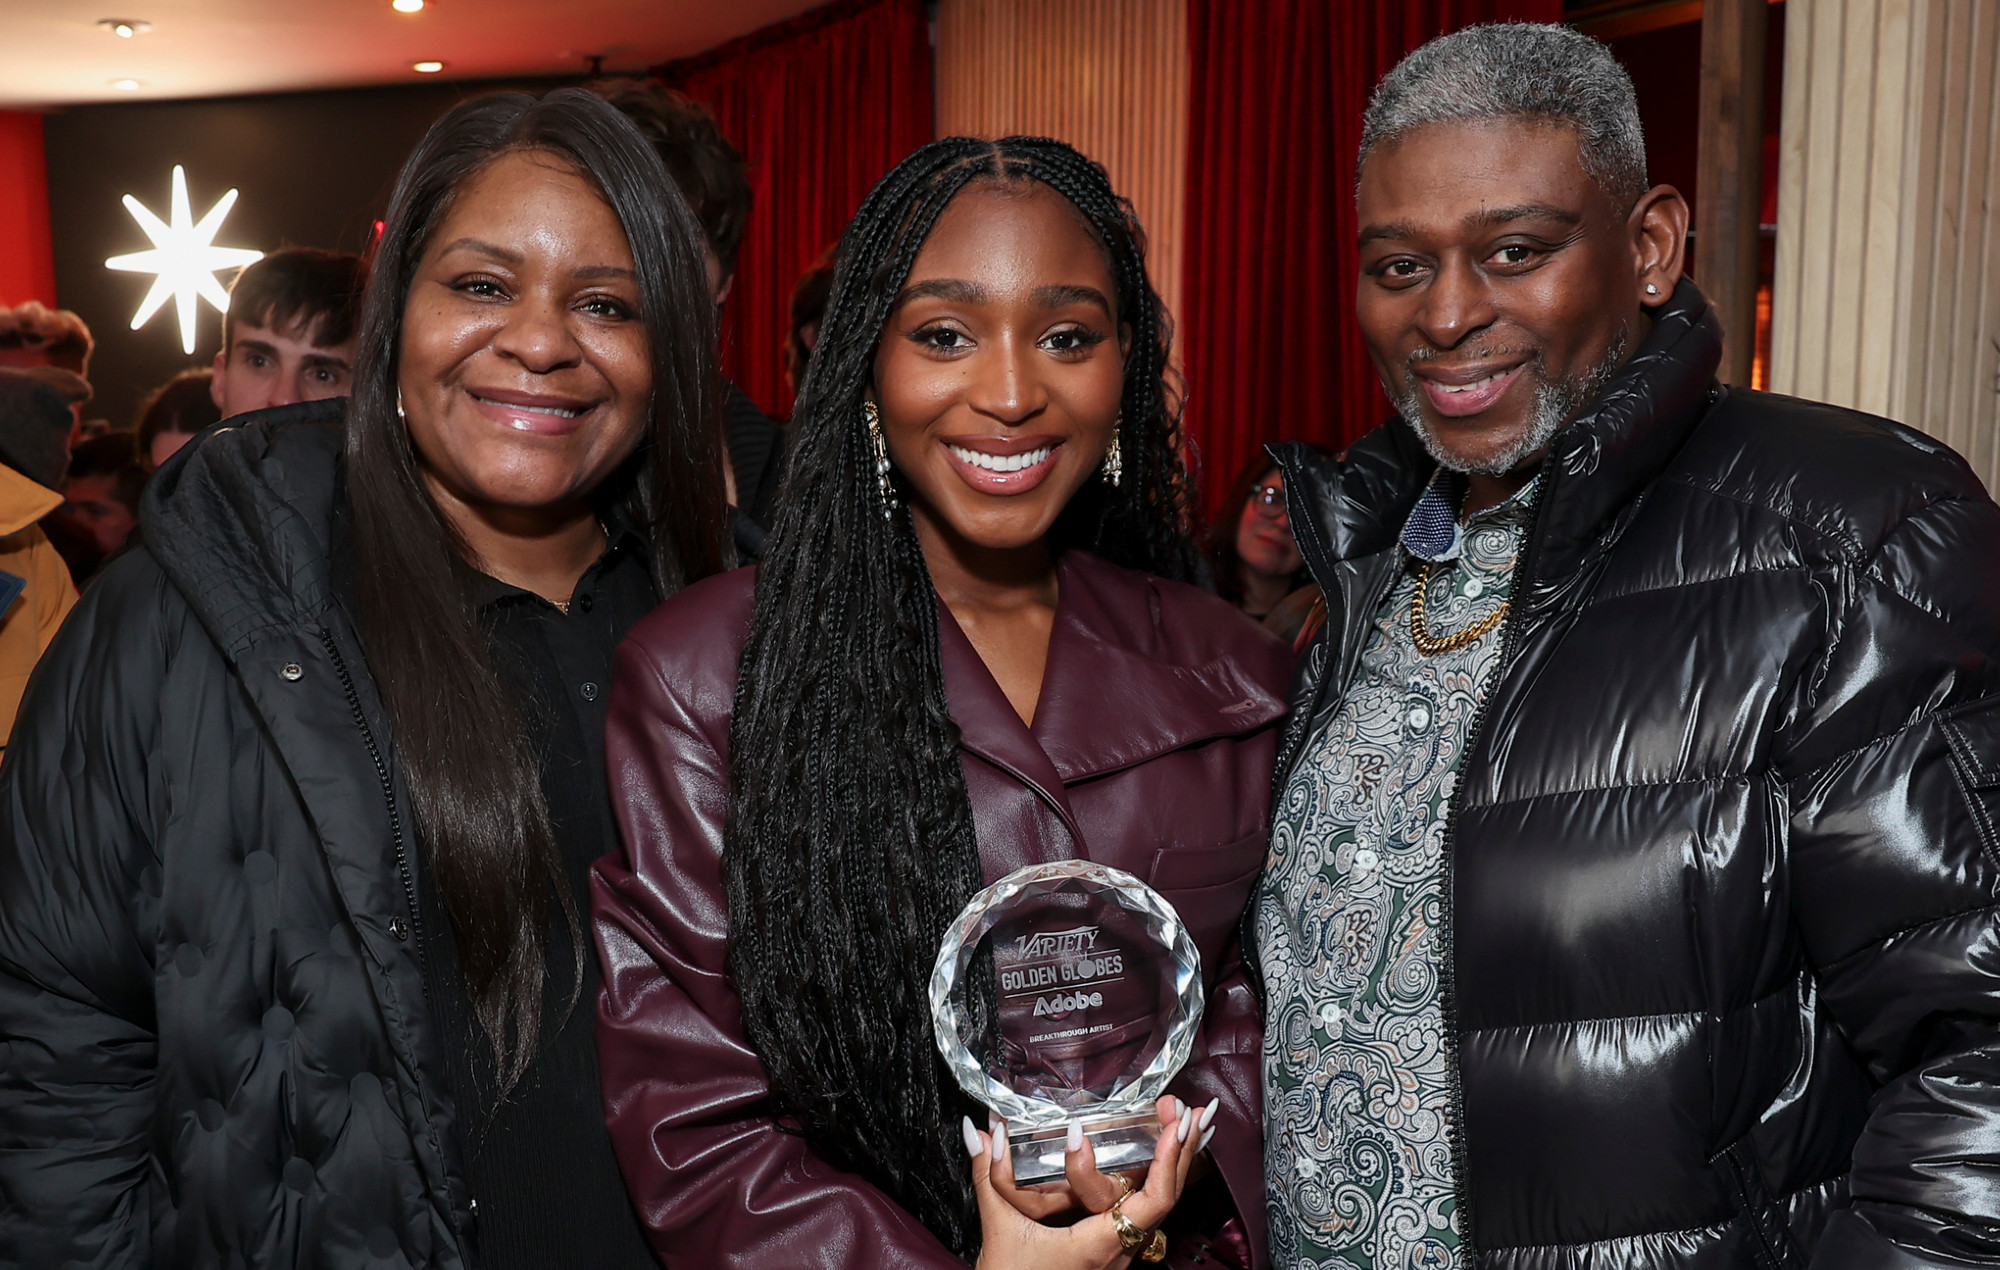 (From left to right) Andrea Hamilton, Normani and Derrick Hamilton at the Variety and Golden Globes Party at Sundance Film Festival. Photo credit: John Salangsang/Variety via Getty Images